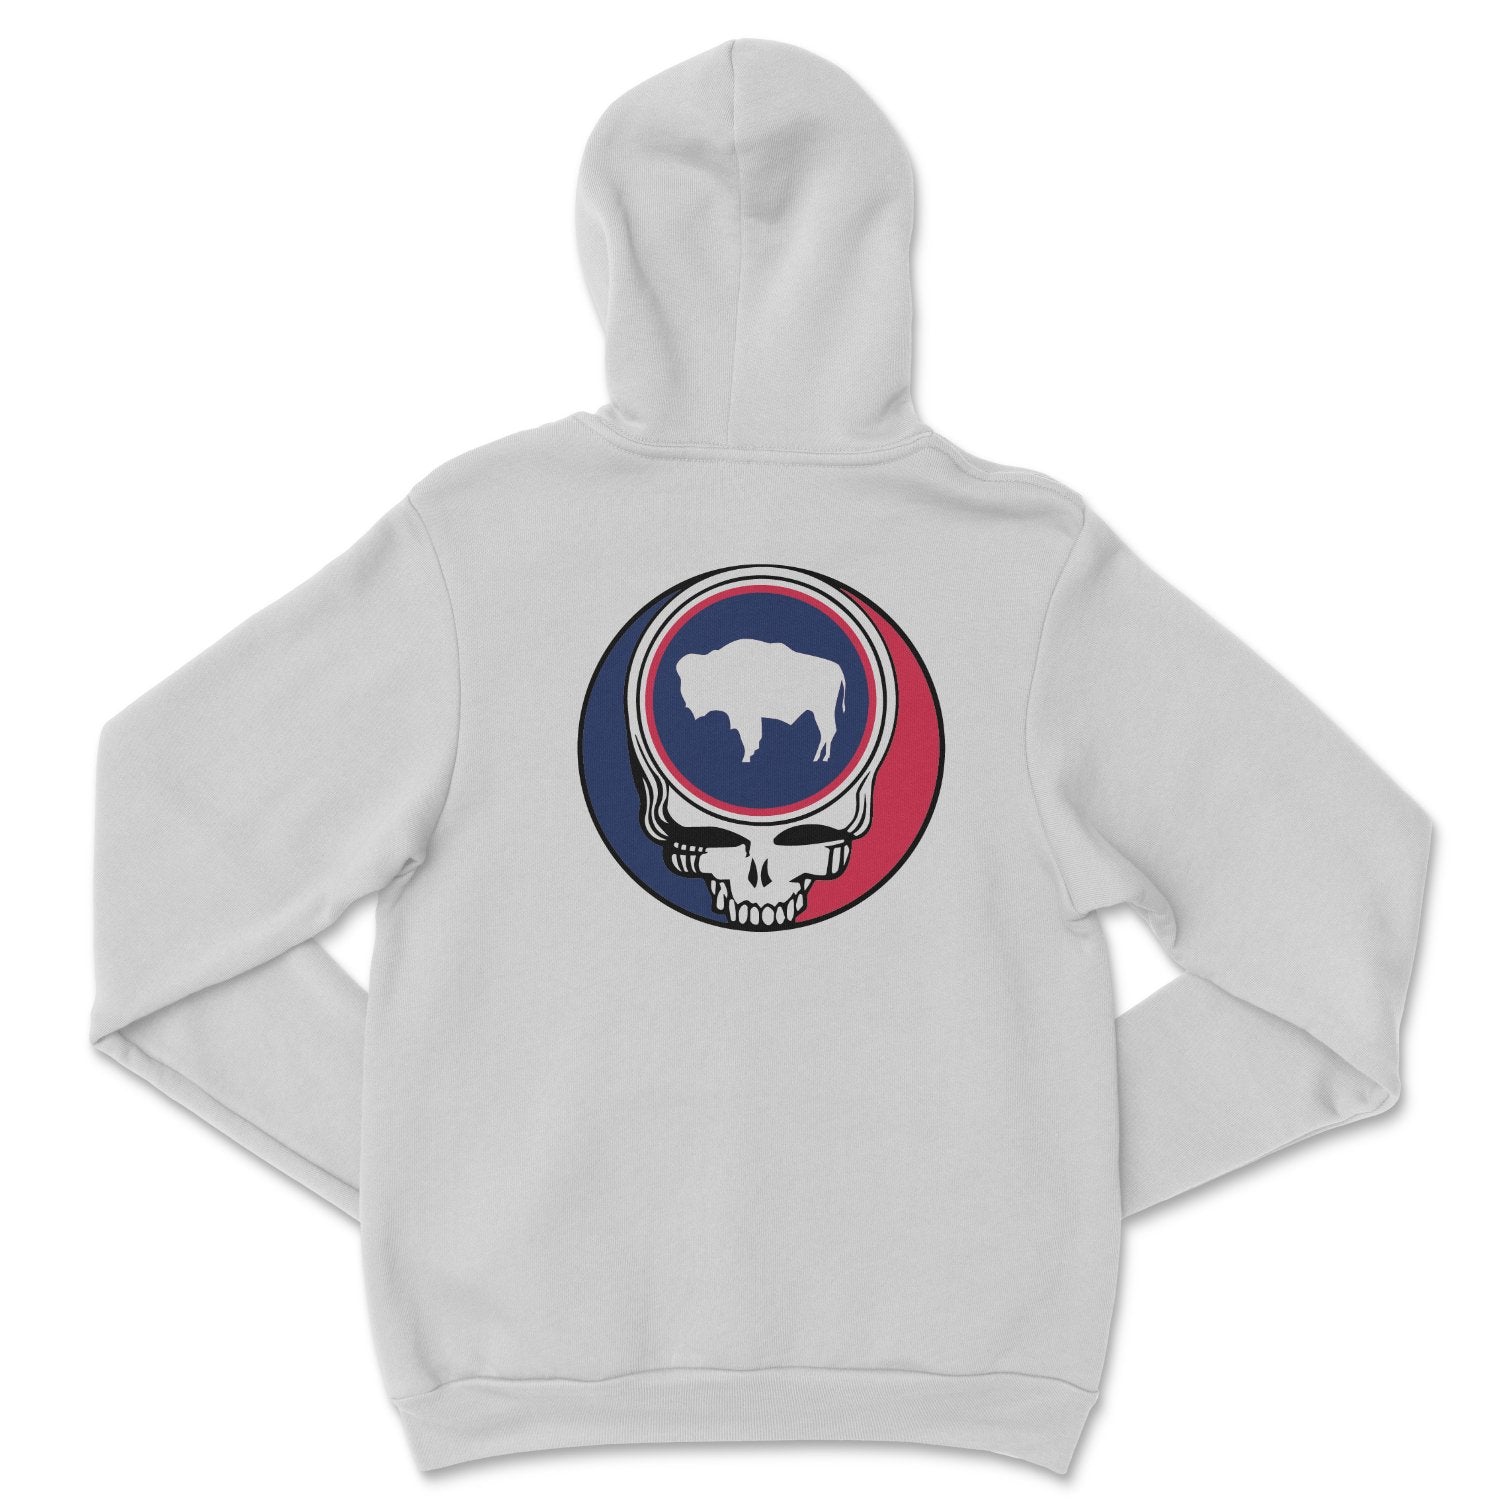 Grateful Dead x TGR Wyoming Steal Your State Hoodie - Teton Gravity Research